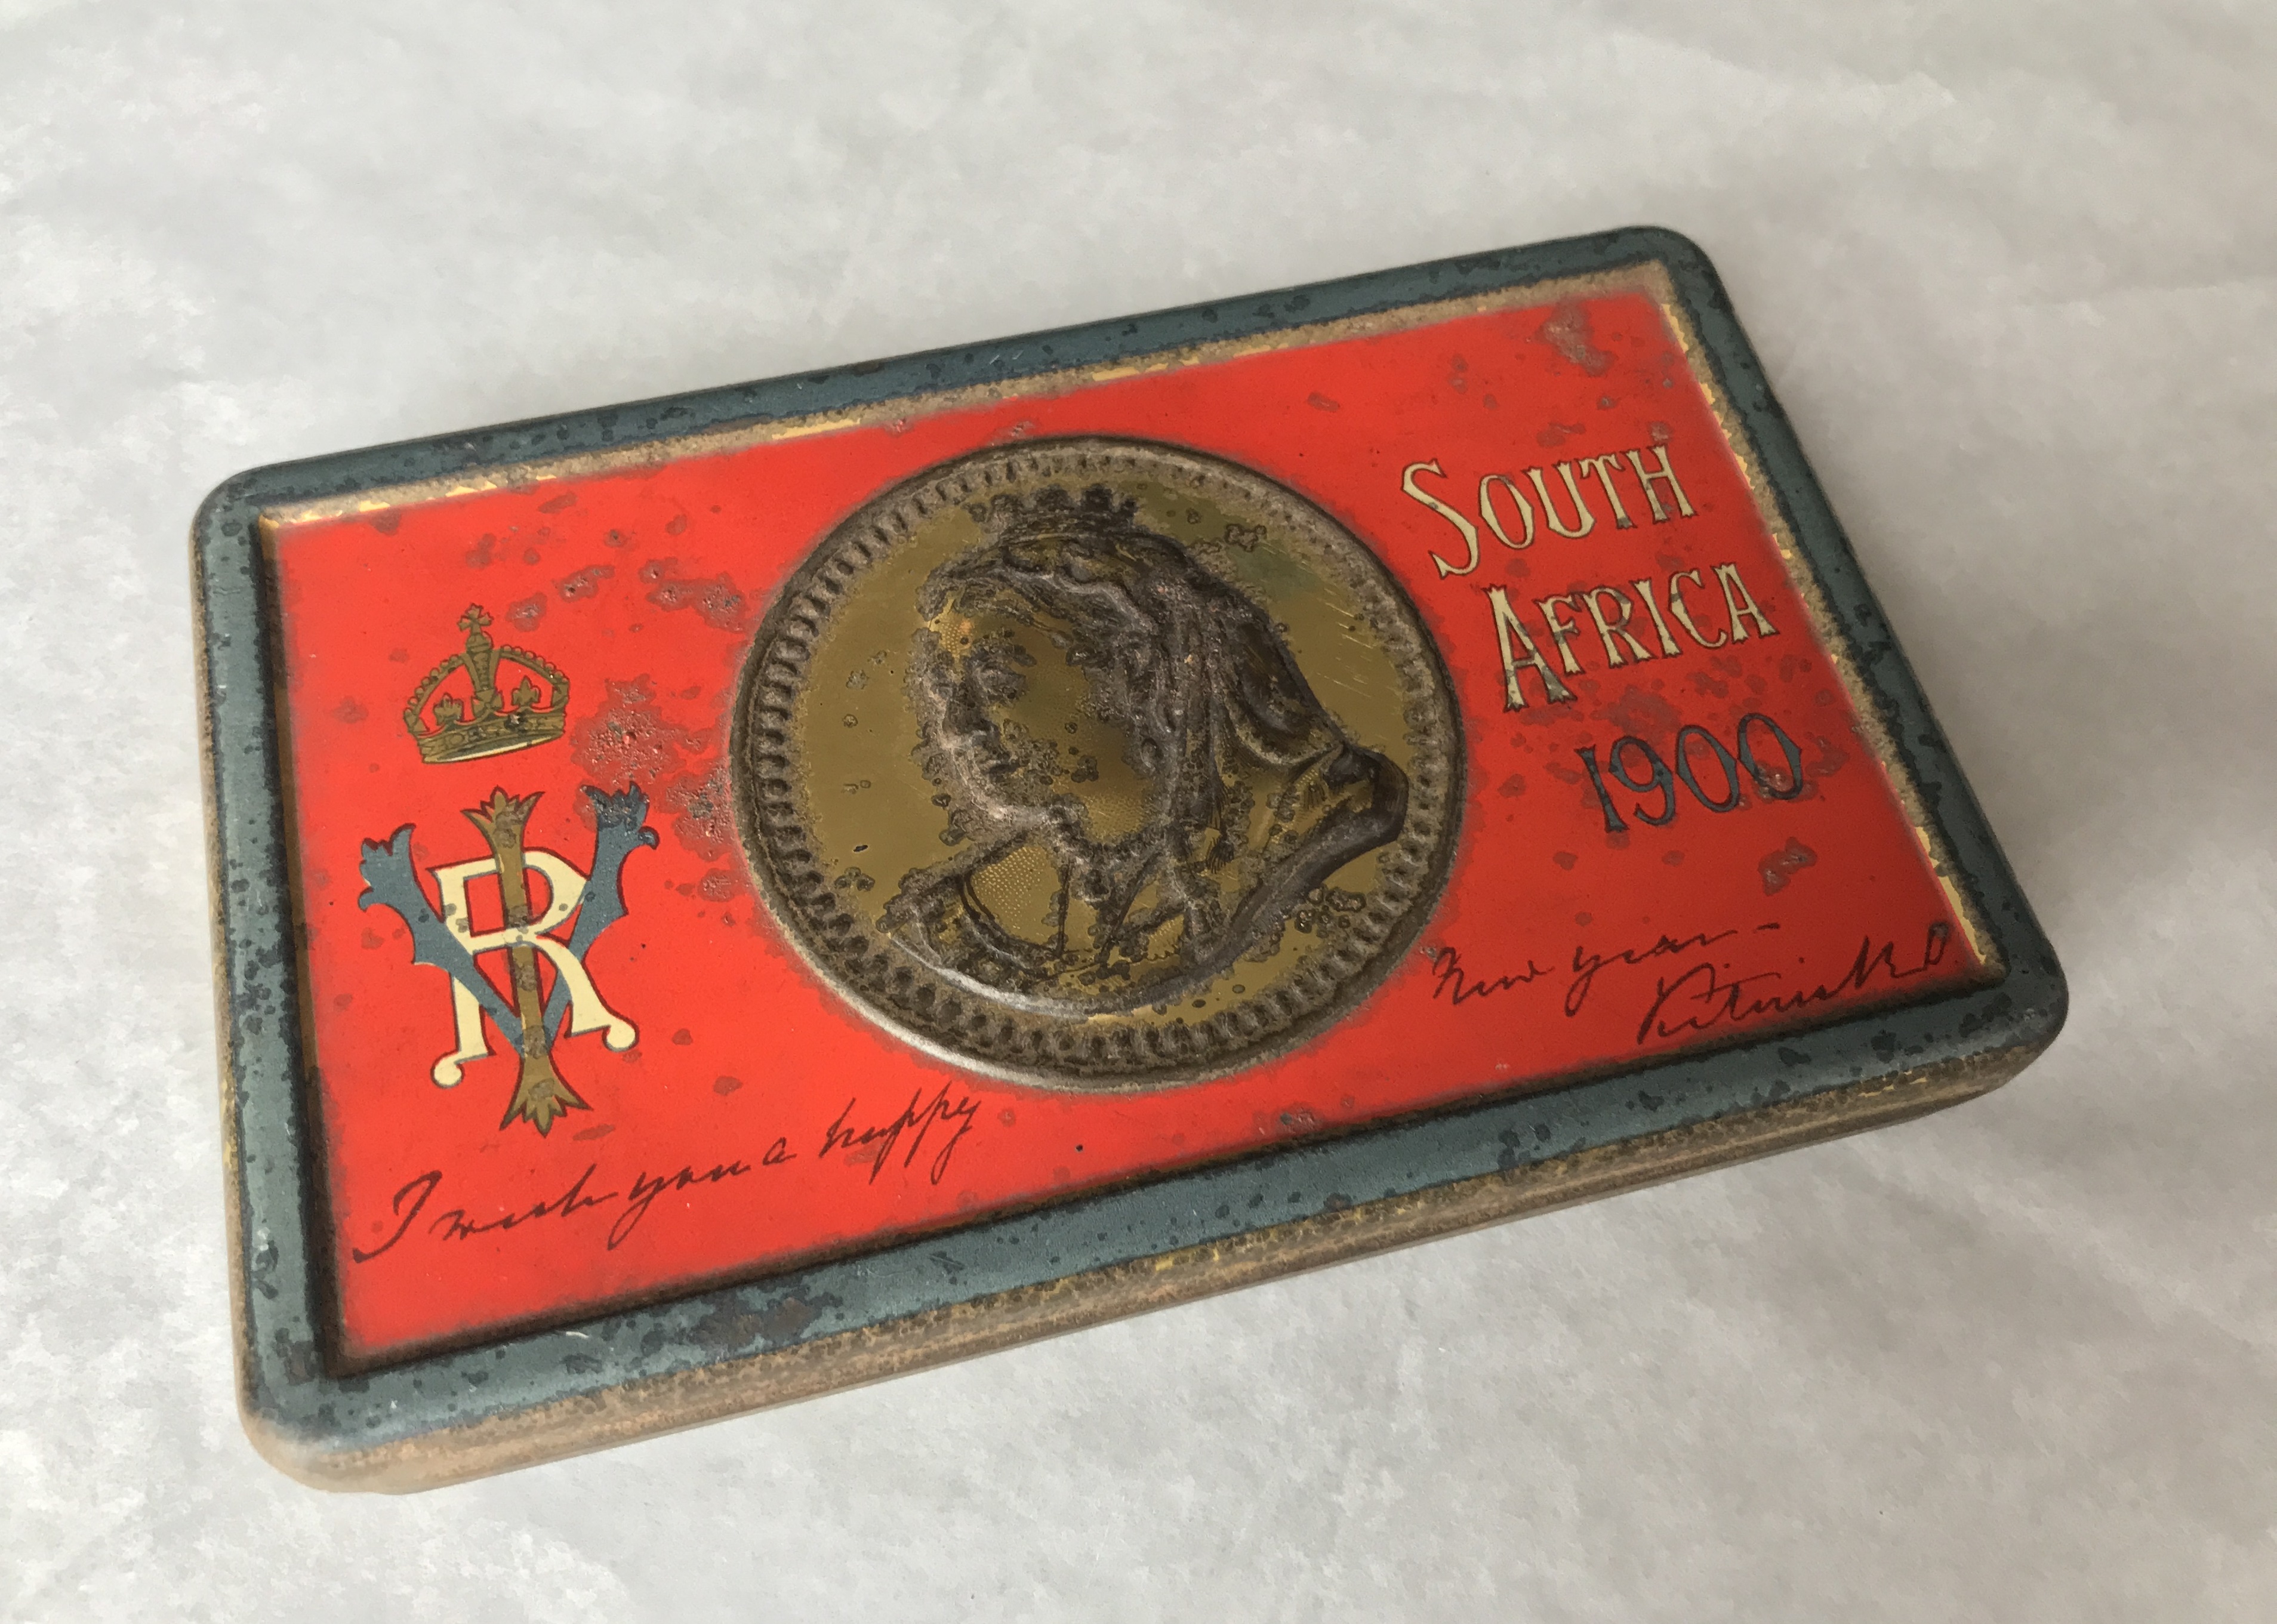 The tins were made by the country's three principal chocolate manufacturers but were not branded, as they opposed the war. (National Trust/ Victoria Mckeown/ PA)